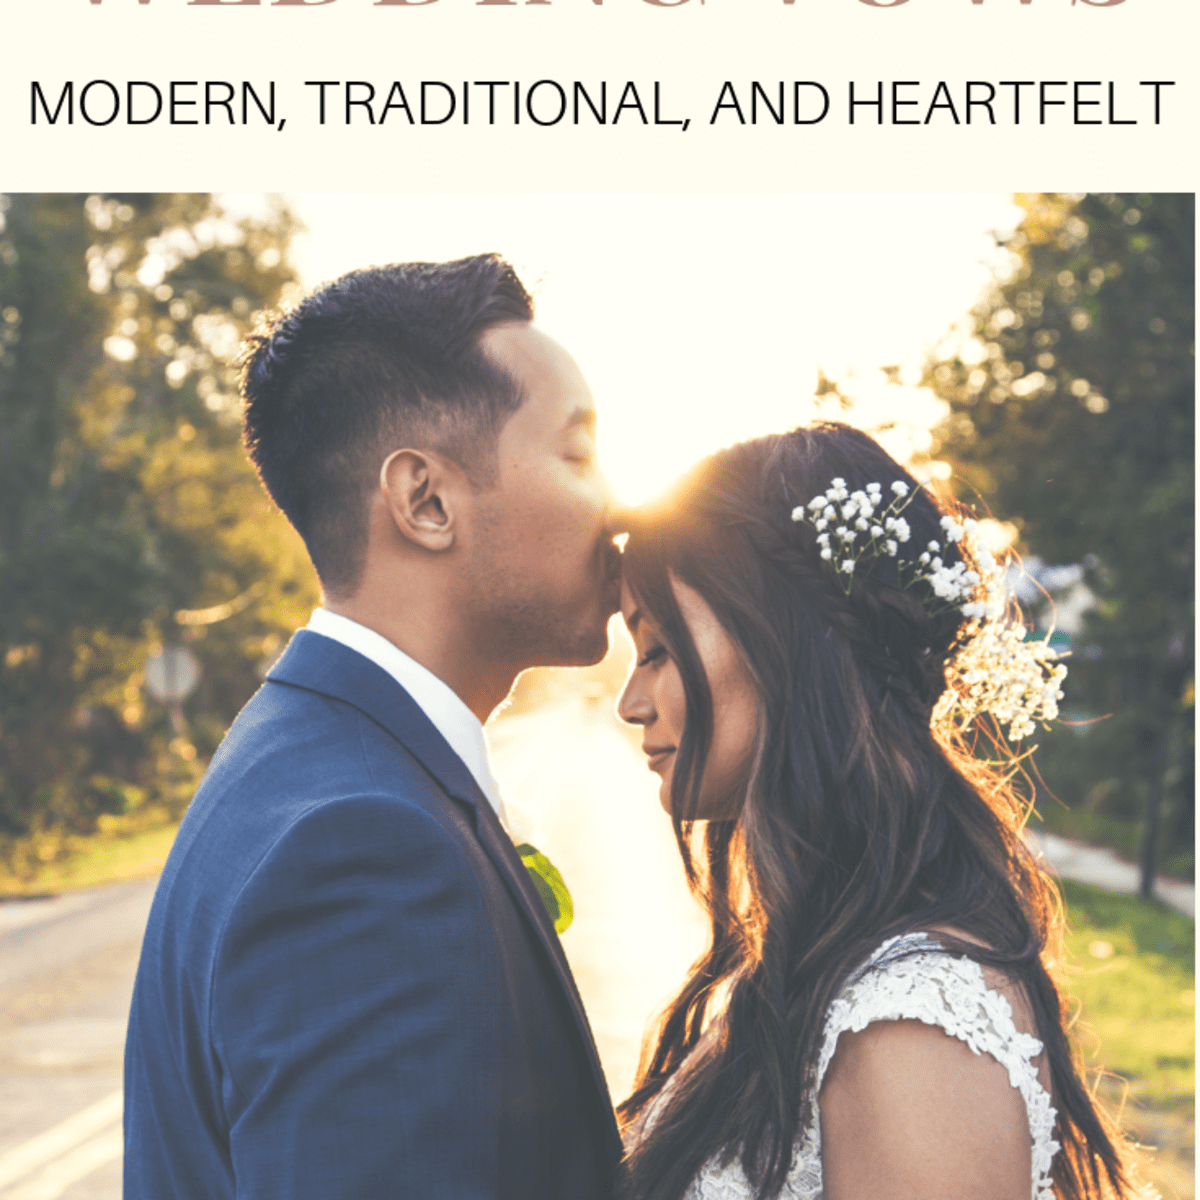 28+ Romantic Wedding Vows and Quotes for Him and Her - Holidappy